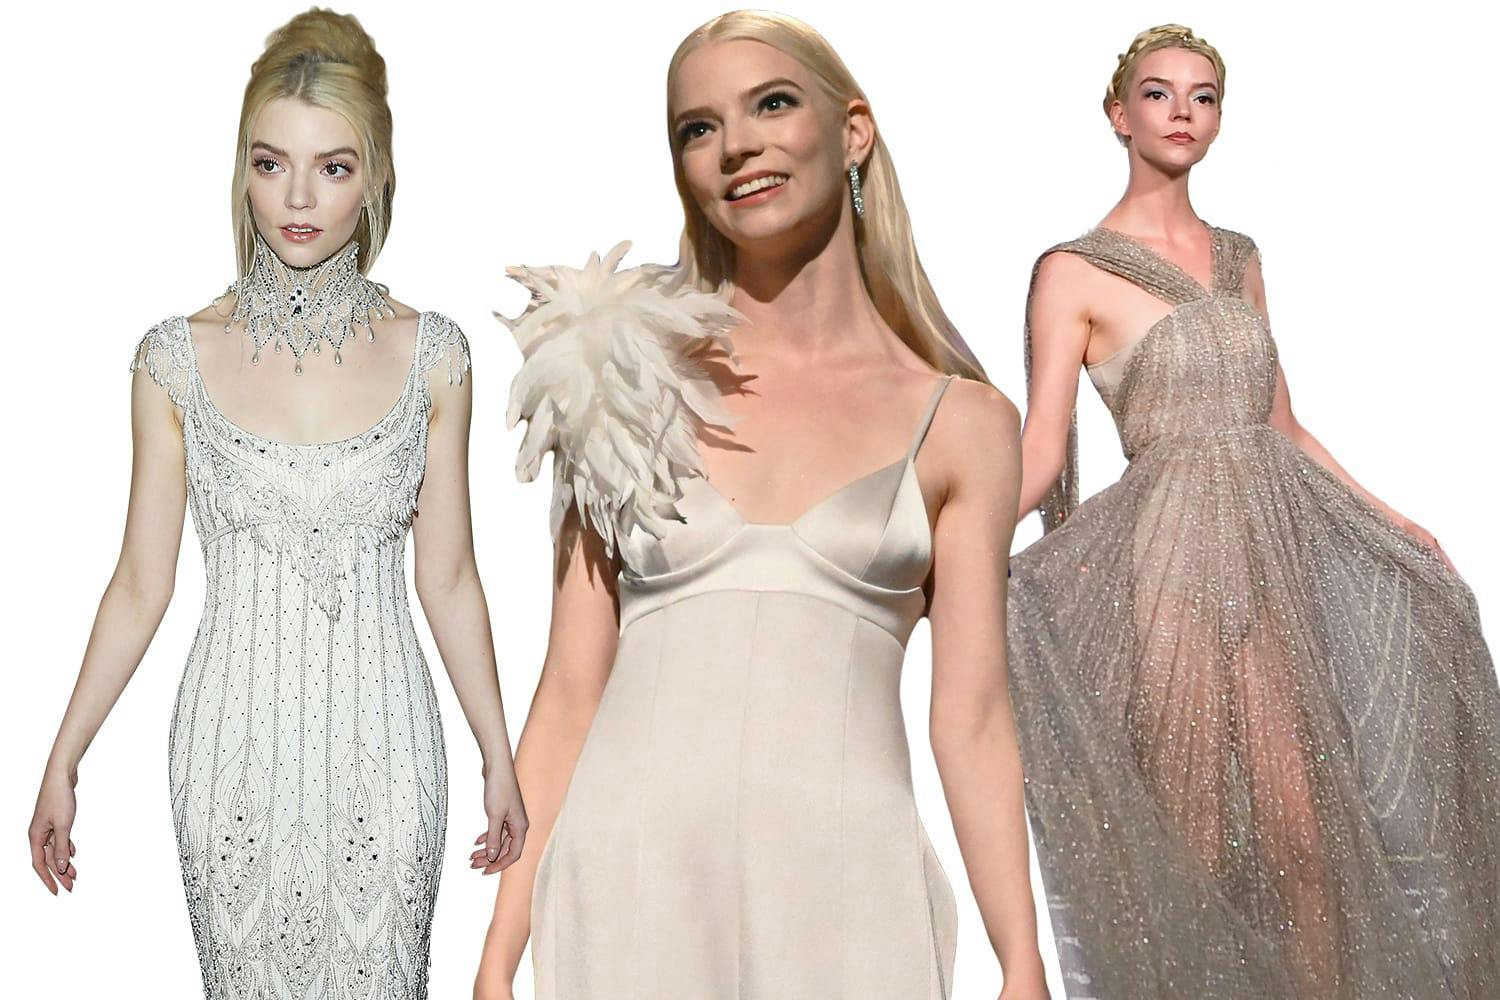 From left to right: Anya Taylor-Joy wears a sequined silver and white gown, and matching choker necklace. Her hair is up, and behind her reads: Emma, Focus Feature, and Working Title. She stands in front of flowers; Anya Taylor-Joy wears a silky silver gown with an enormous feather poof on her shoulder. She welcomes the audience in the iconic SNL arena; Anya Taylor-Joy looks incredible in a silver, sheer gown at the 2022 Dior Croisier show in Athens. Her hair is tied up, her legs are just visible through the gauzy fabric, and the backdrop is a Grecian collage of purple, black, and yellow figures.